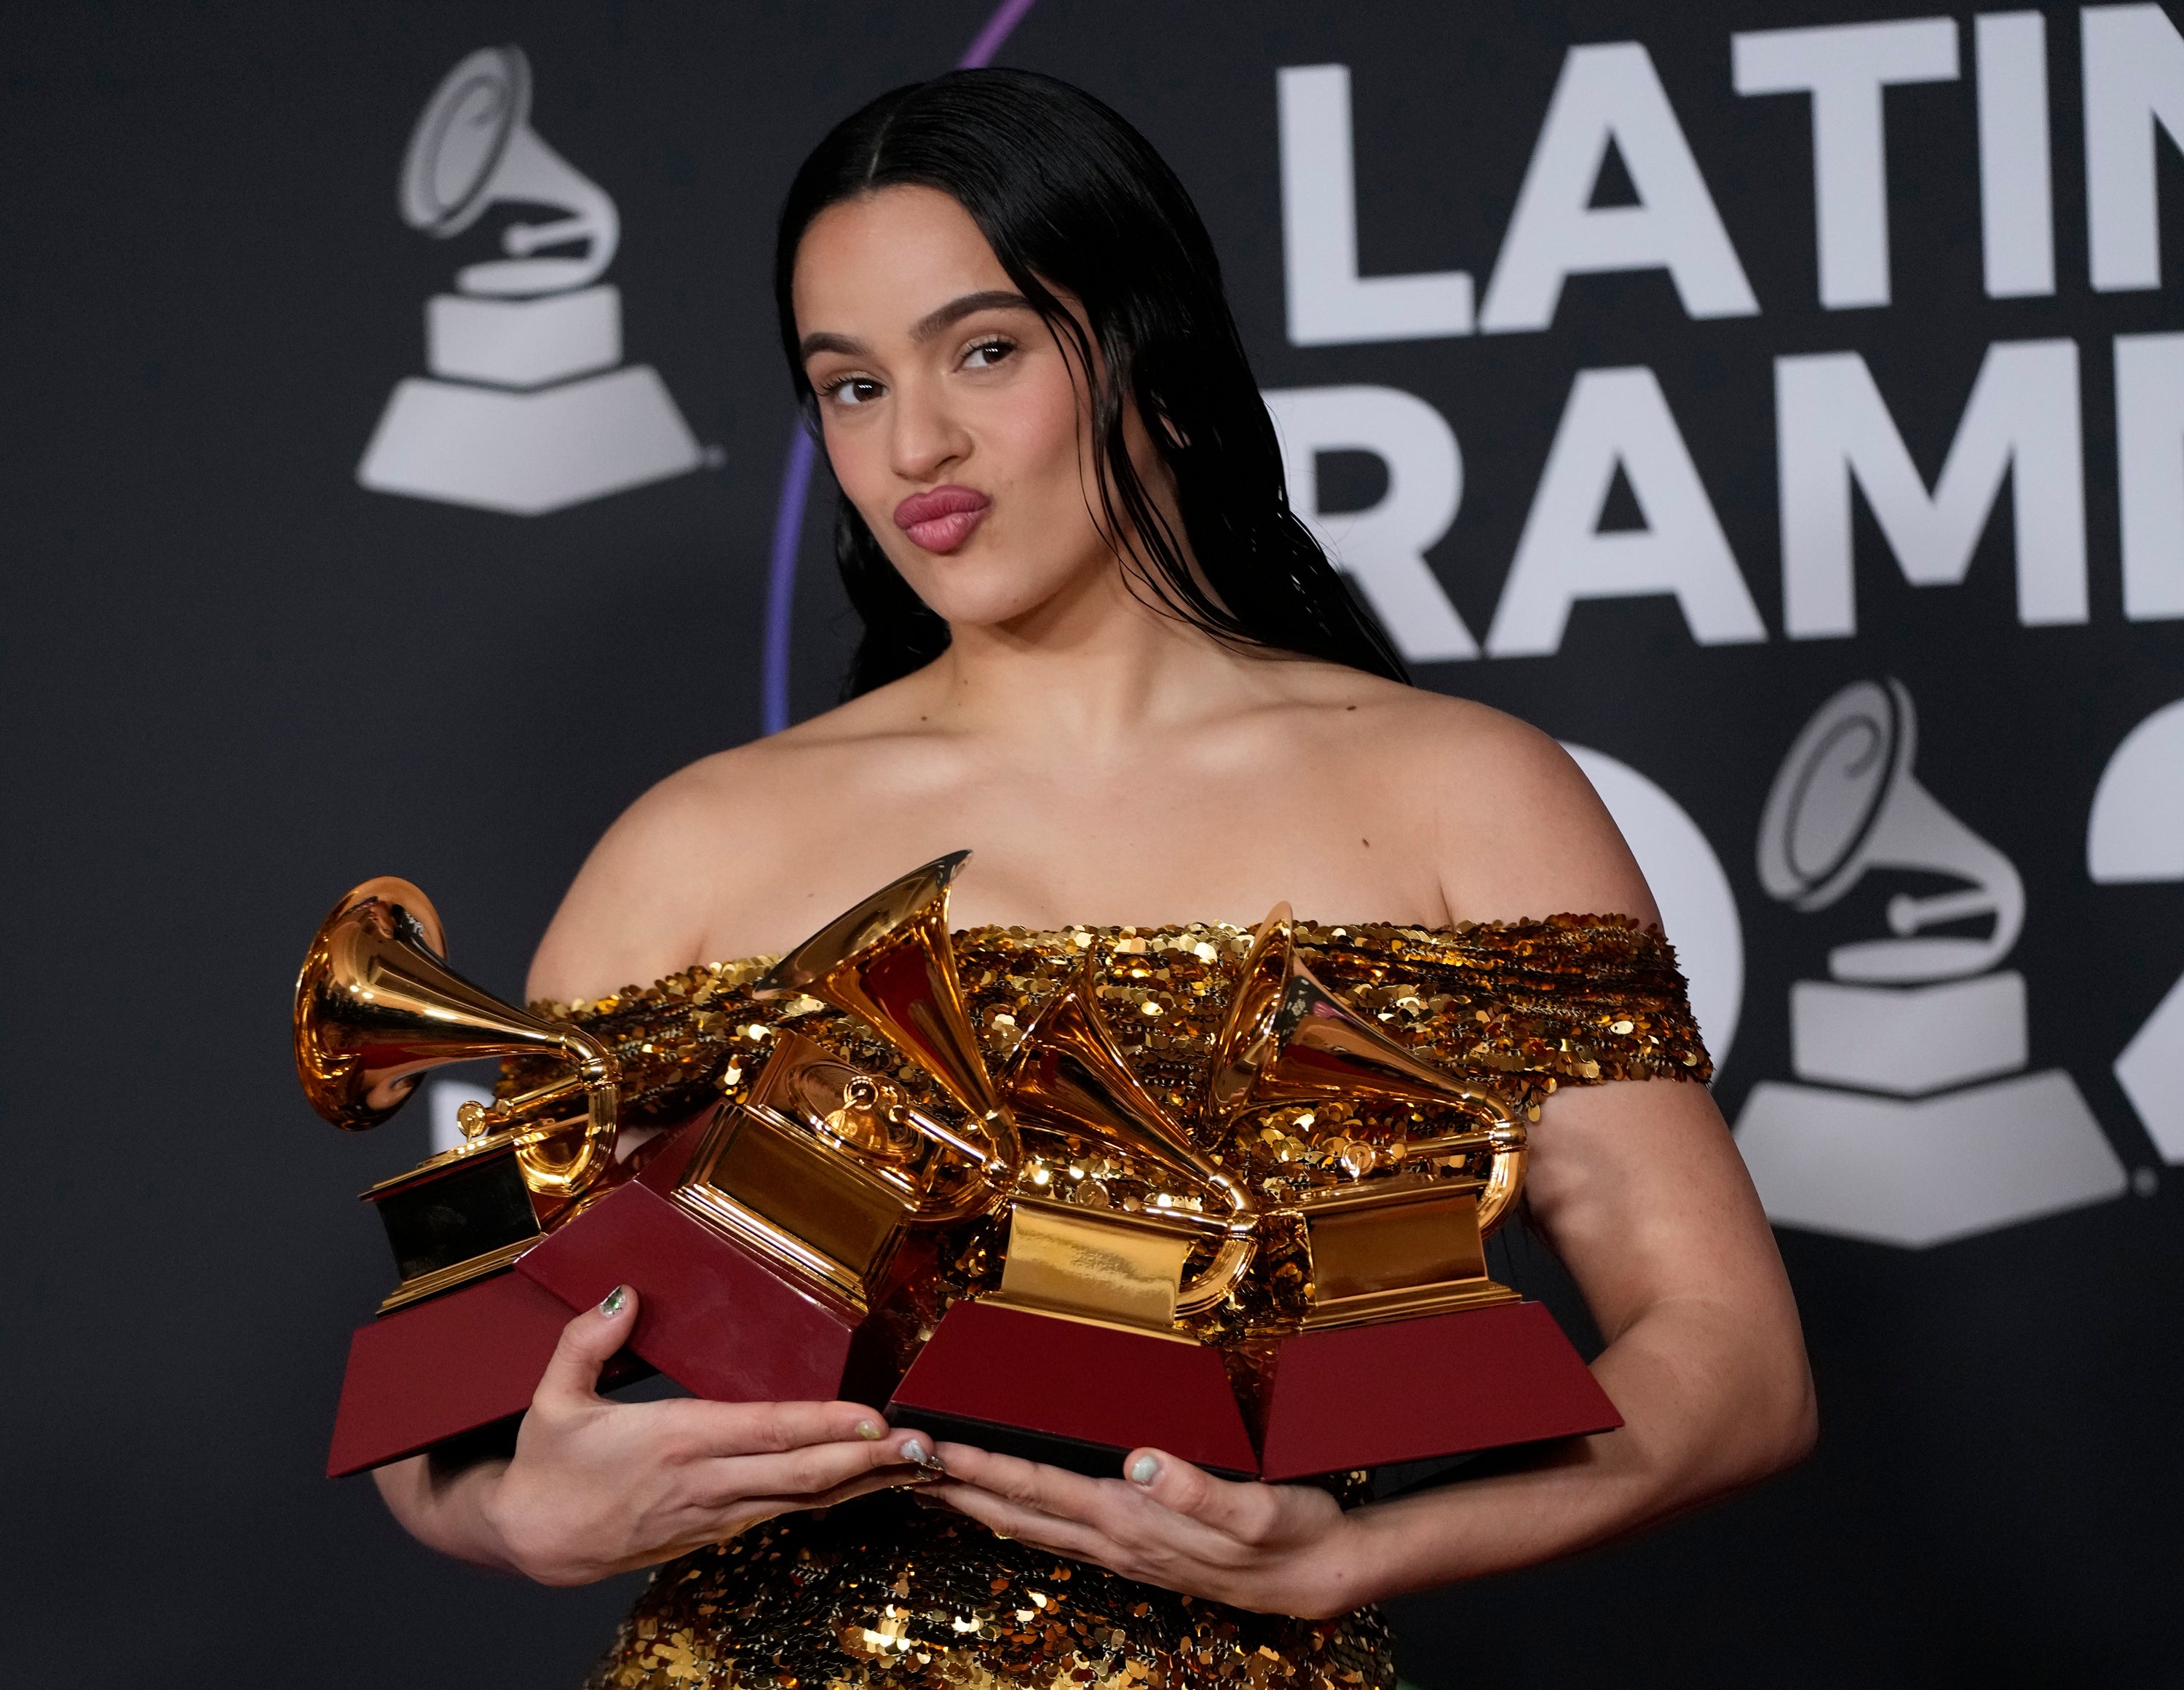 Latin Grammys to be held in Spain, leaving US for 1st time The Independent